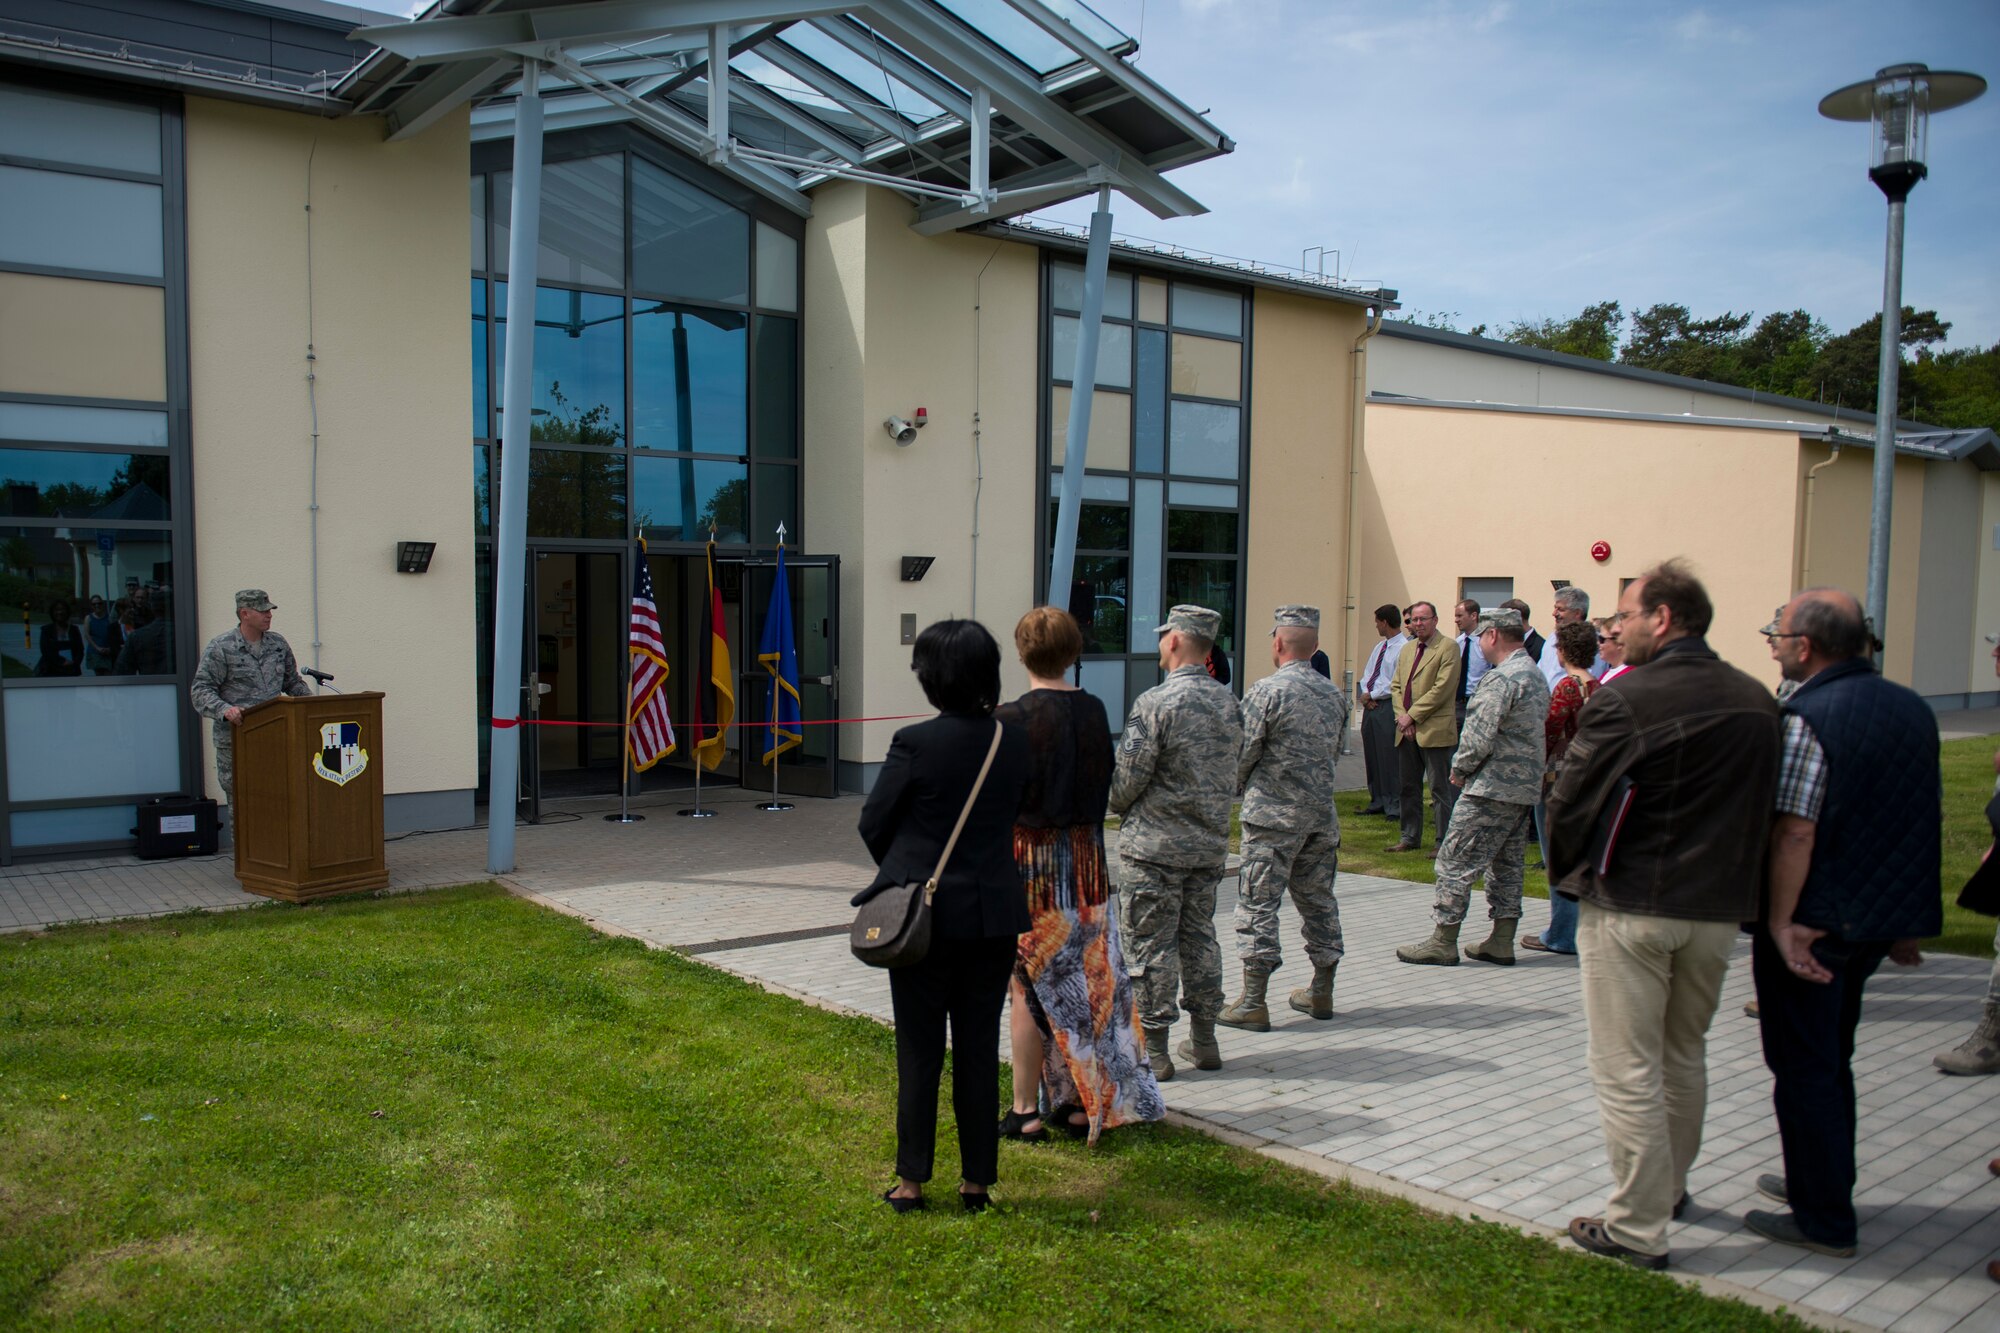 U.S. Air Force Col. Joe McFall, 52nd Fighter Wing commander, speaks to 52nd FW leadership and key community members during the official opening of the new child development center at Spangdahlem Air Base, Germany, May 11, 2015. More than 40 people were in attendance to celebrate the opening of the new facility. (U.S. Air Force photo by Airman 1st Class Luke Kitterman/Released)